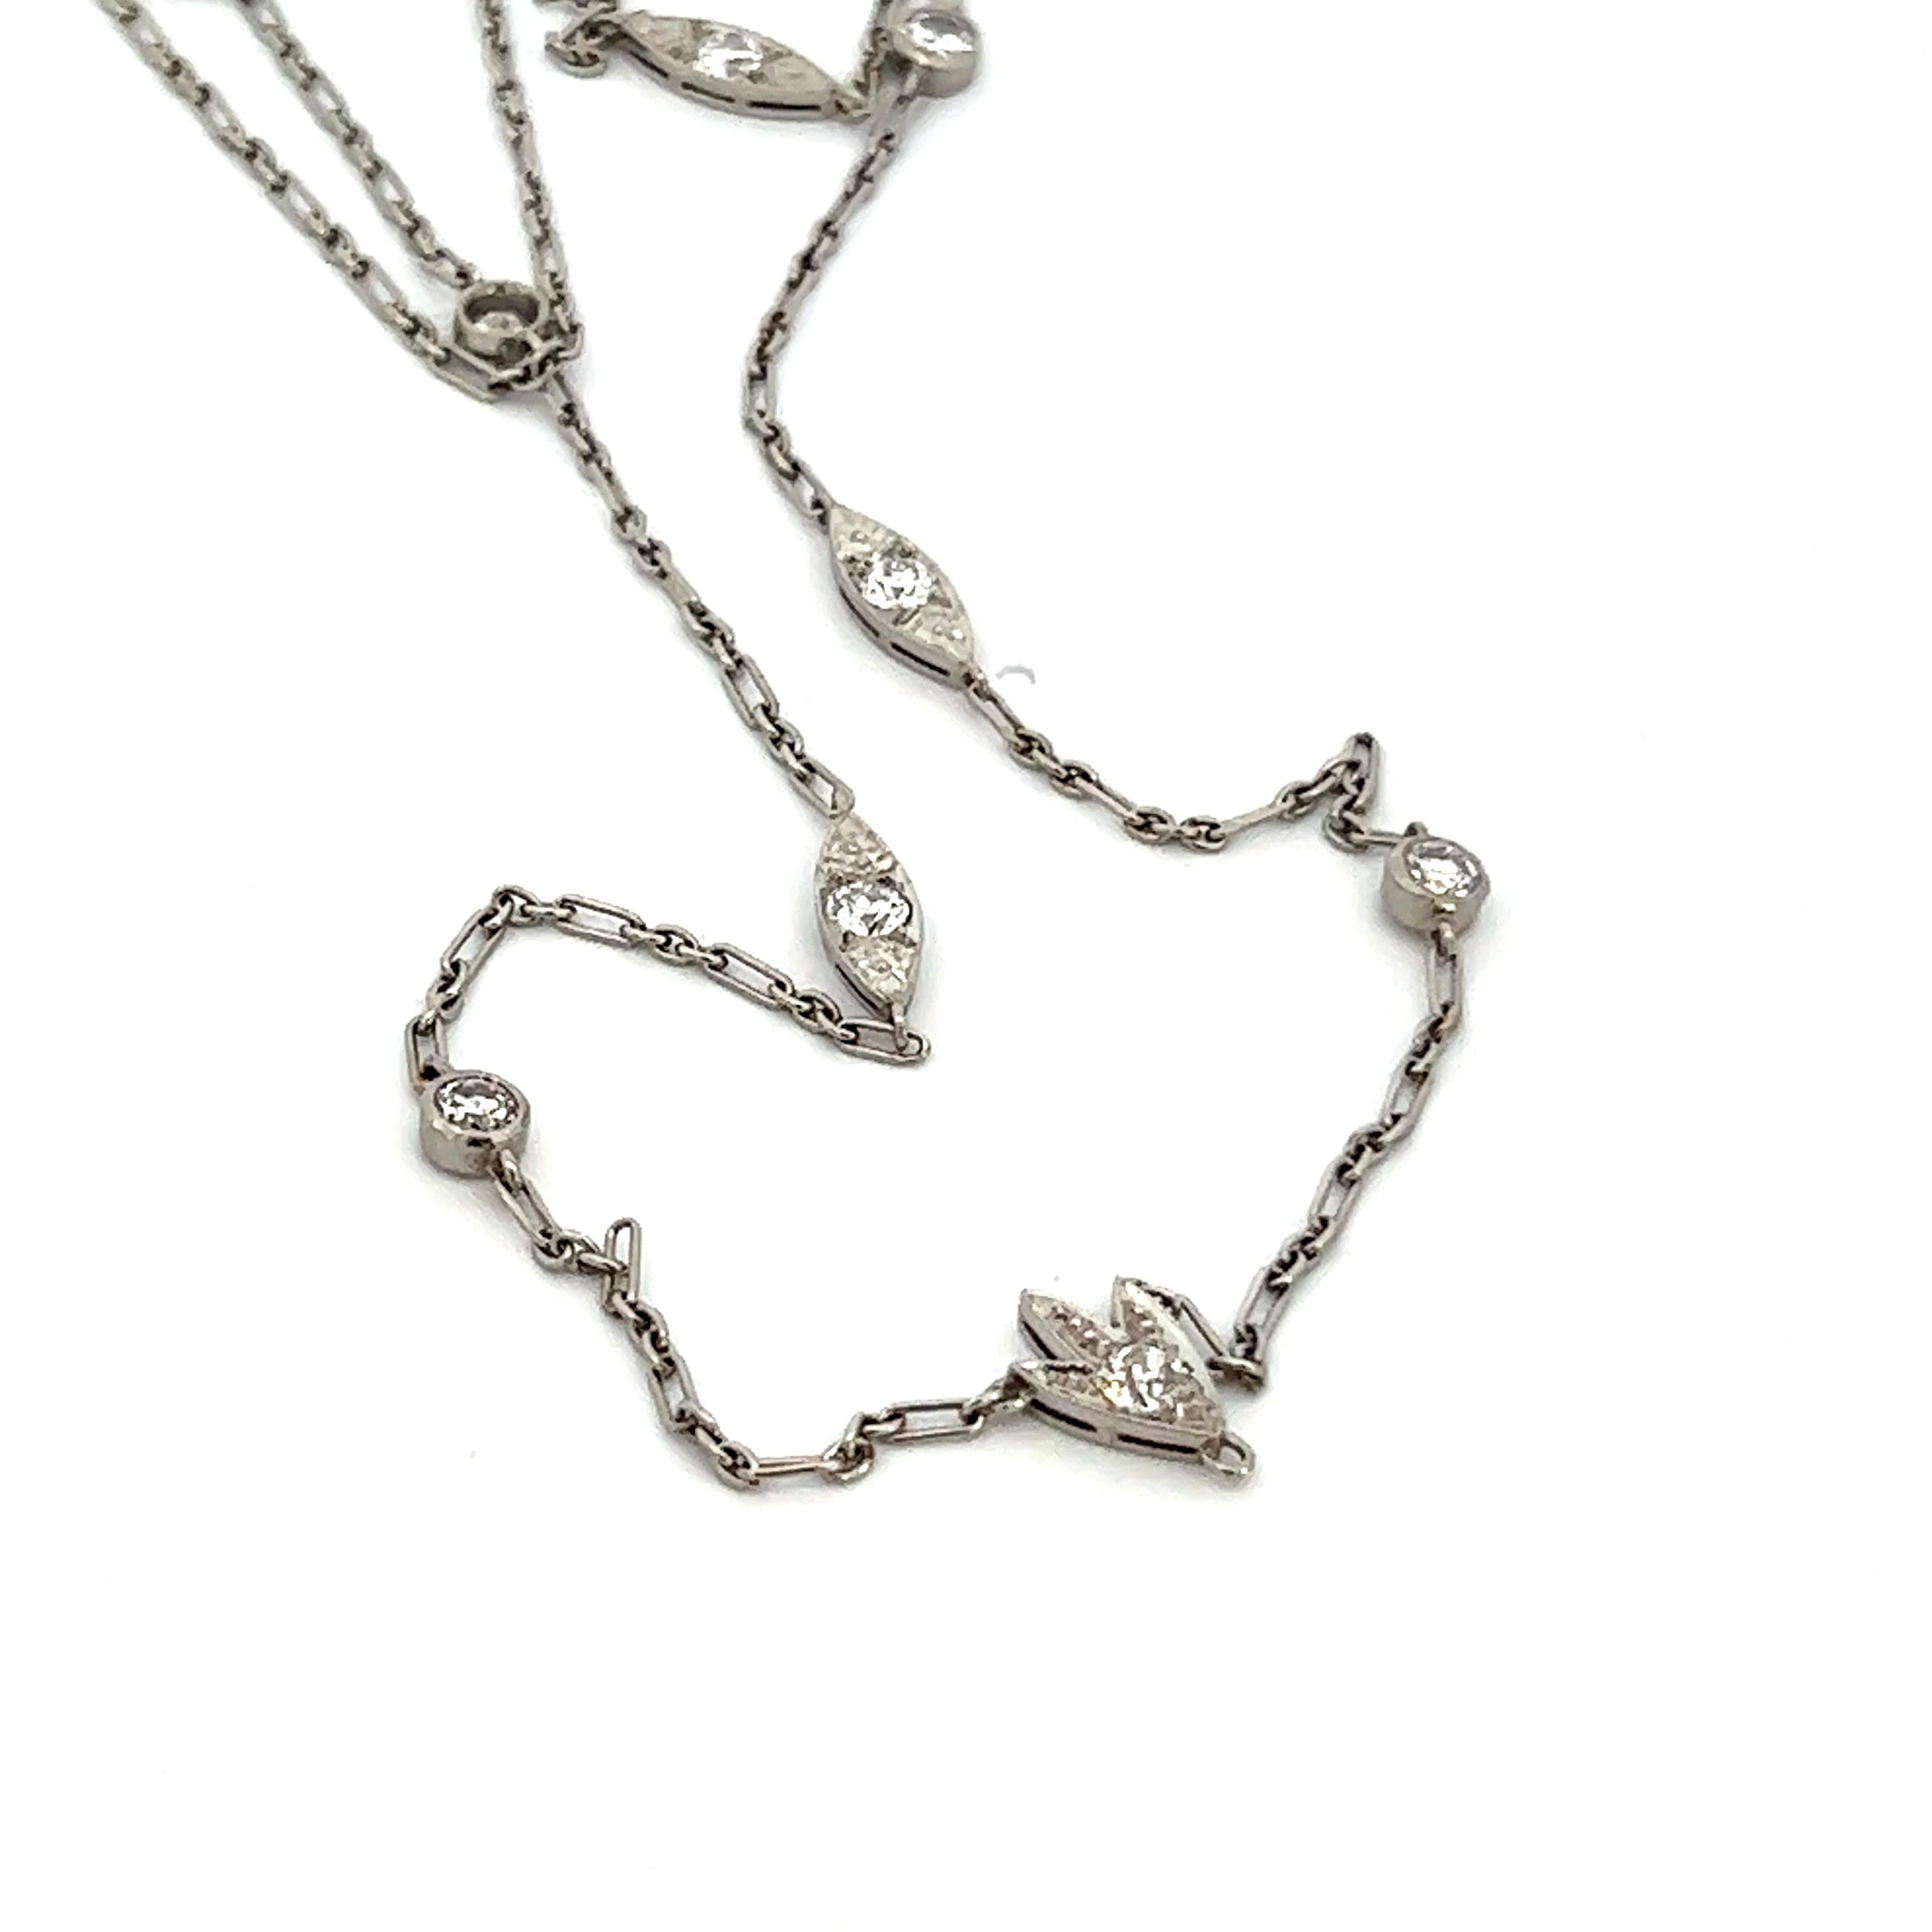 This stunning necklace comes from the 192 Art Deco period and is made in platinum with diamonds. Platinums purity makes it a hypoallergenic metal, making it a perfect material for those with sensitive skin and is also s’more durable than white gold,